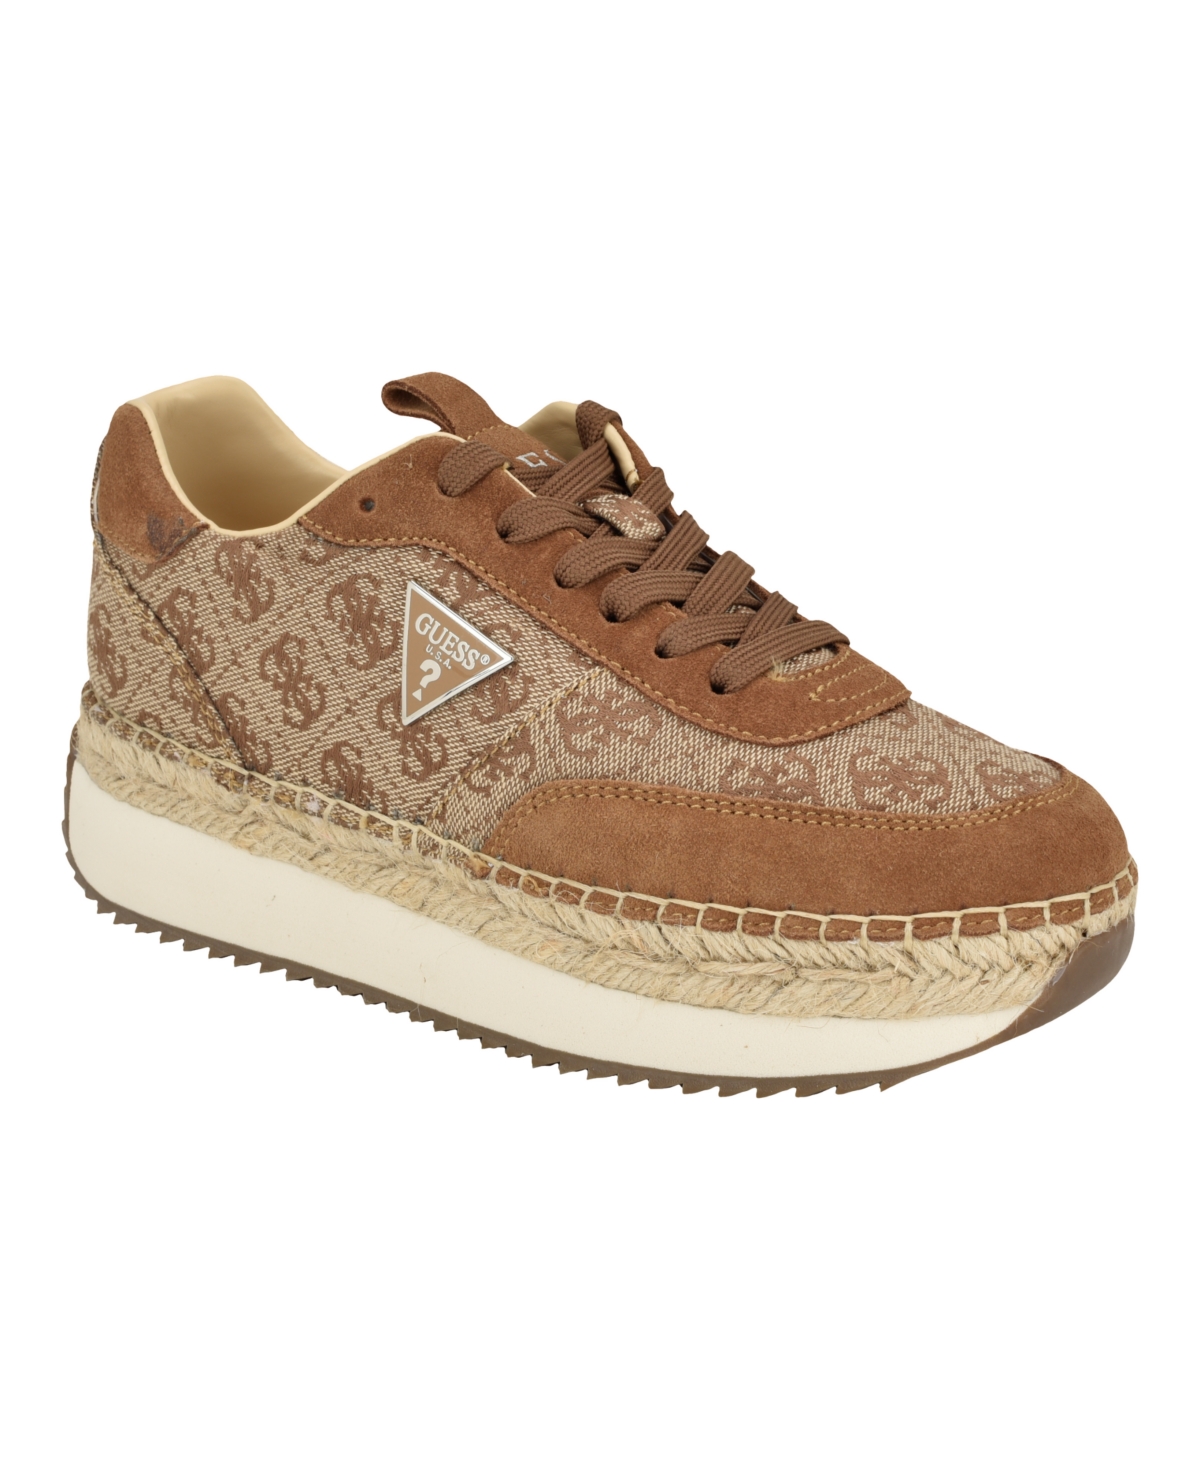 Women's Stefen Lace Up Casual Espadrille Sneakers - Medium Brown